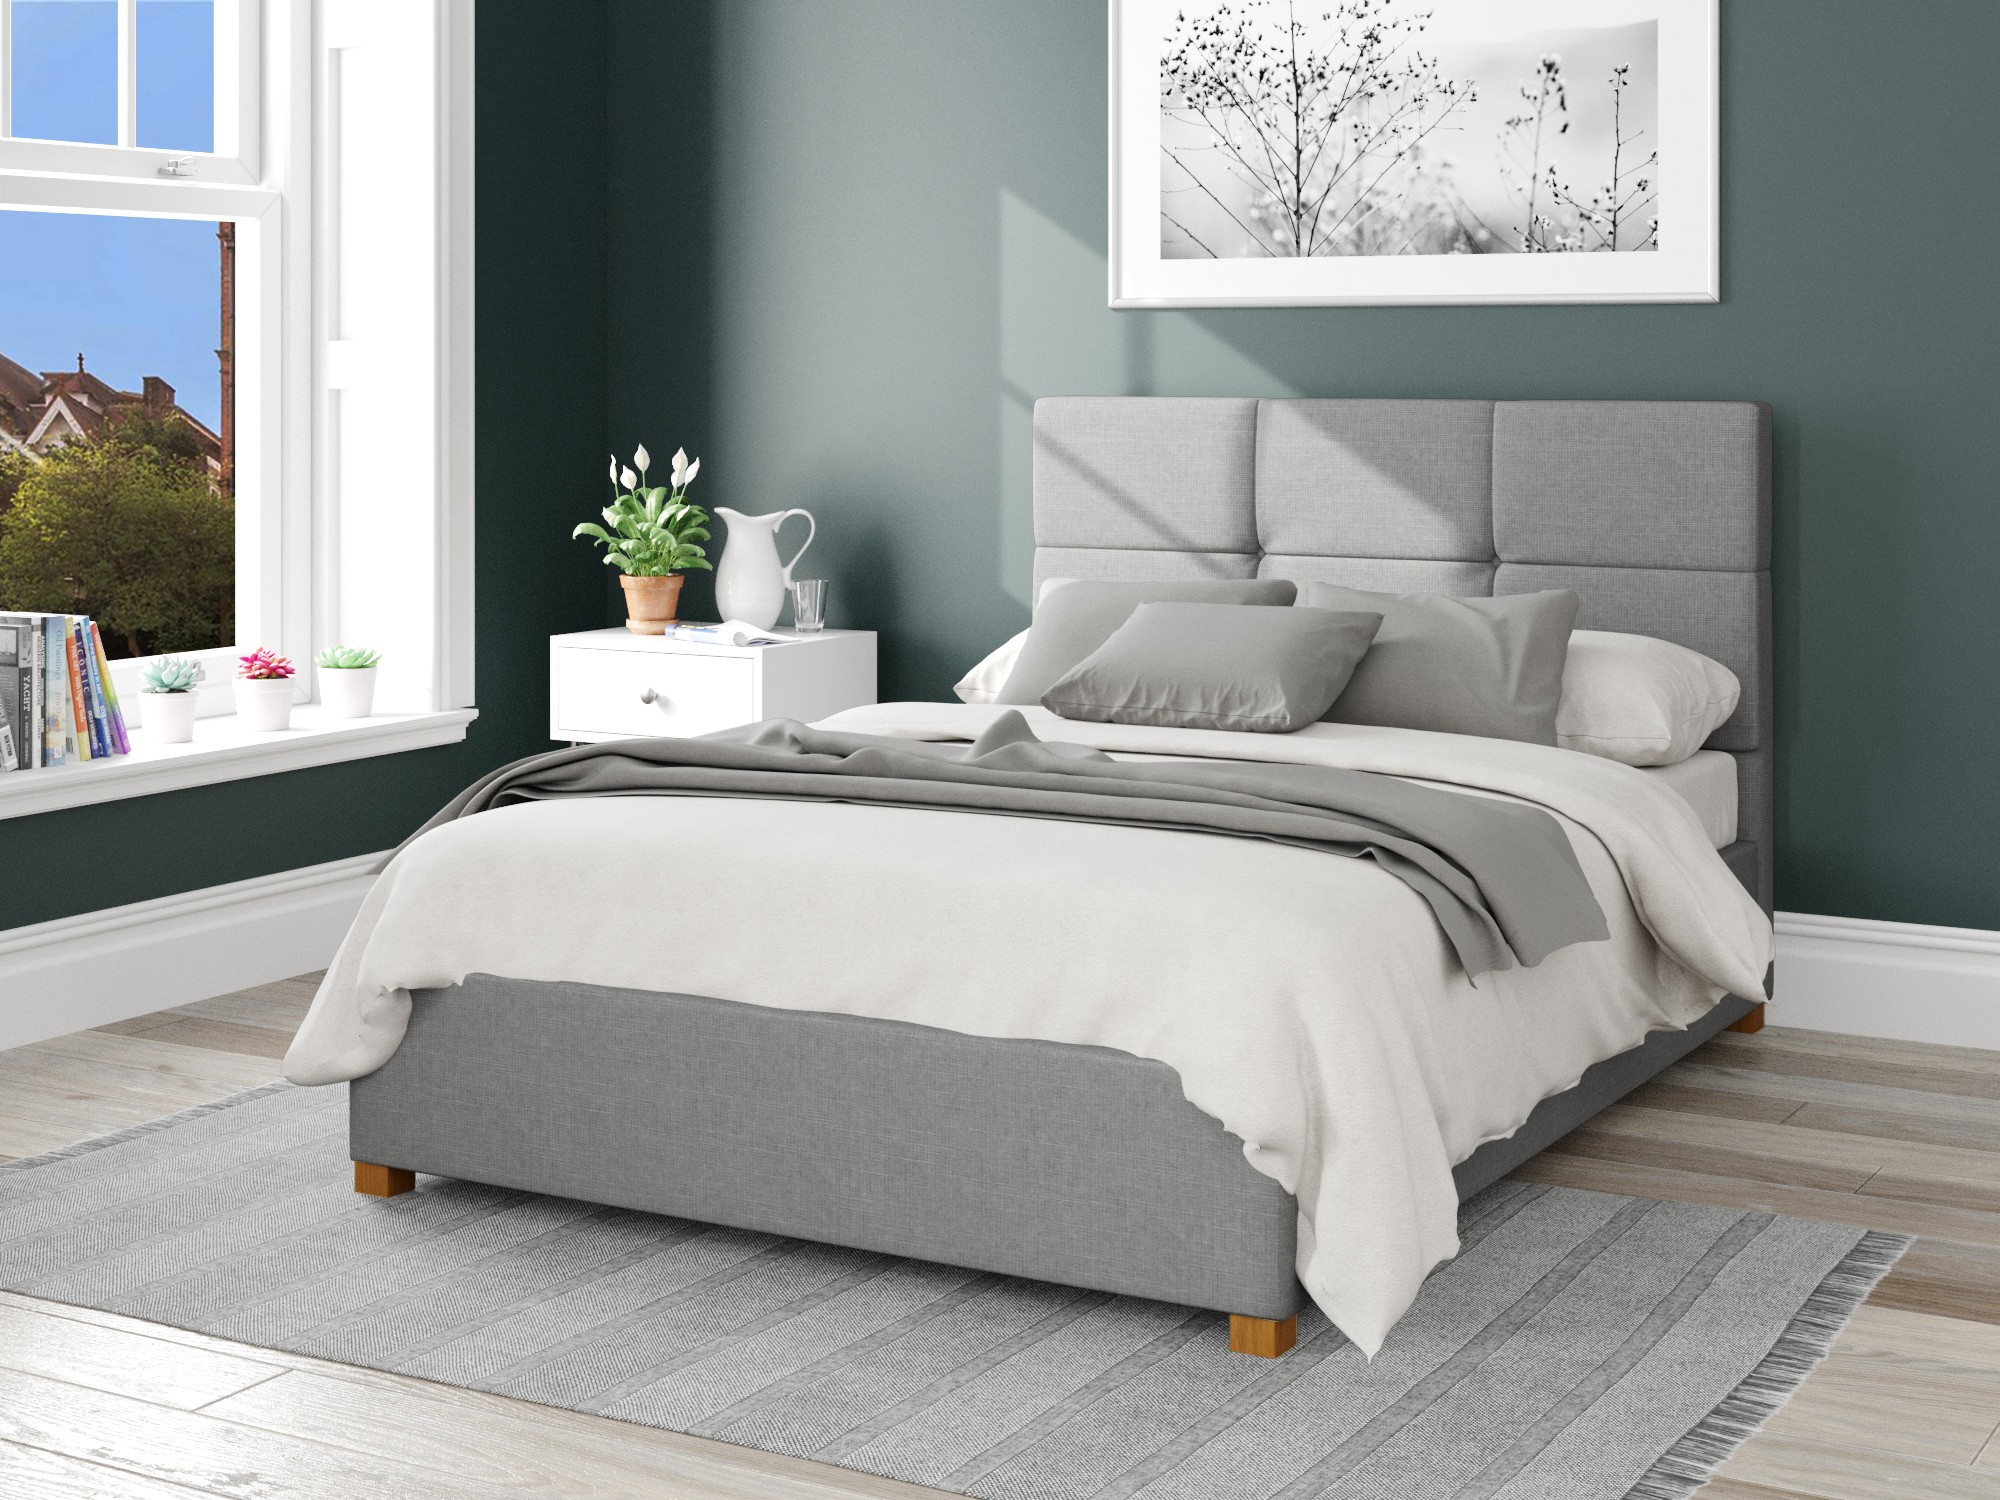 Caine Fabric Ottoman Bed Aspire, Atlas Bed Frame Review